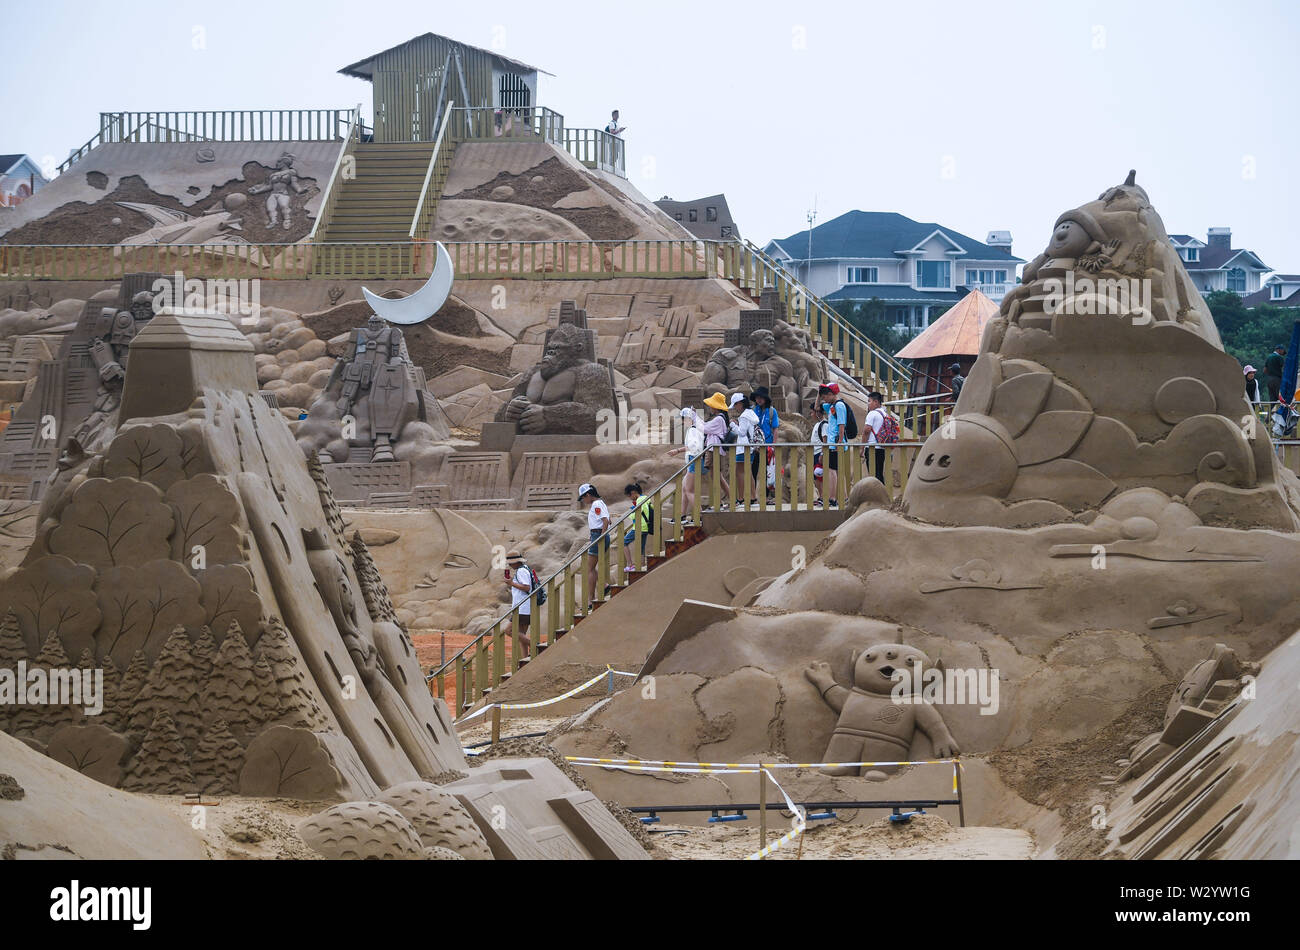 190711) -- ZHOUSHAN, July 11, 2019 (Xinhua) -- Sand sculptures are  displayed at a sand sculpture park in Zhujiajian resort of Zhoushan City,  east China's Zhejiang Province, July 10, 2019. About 30